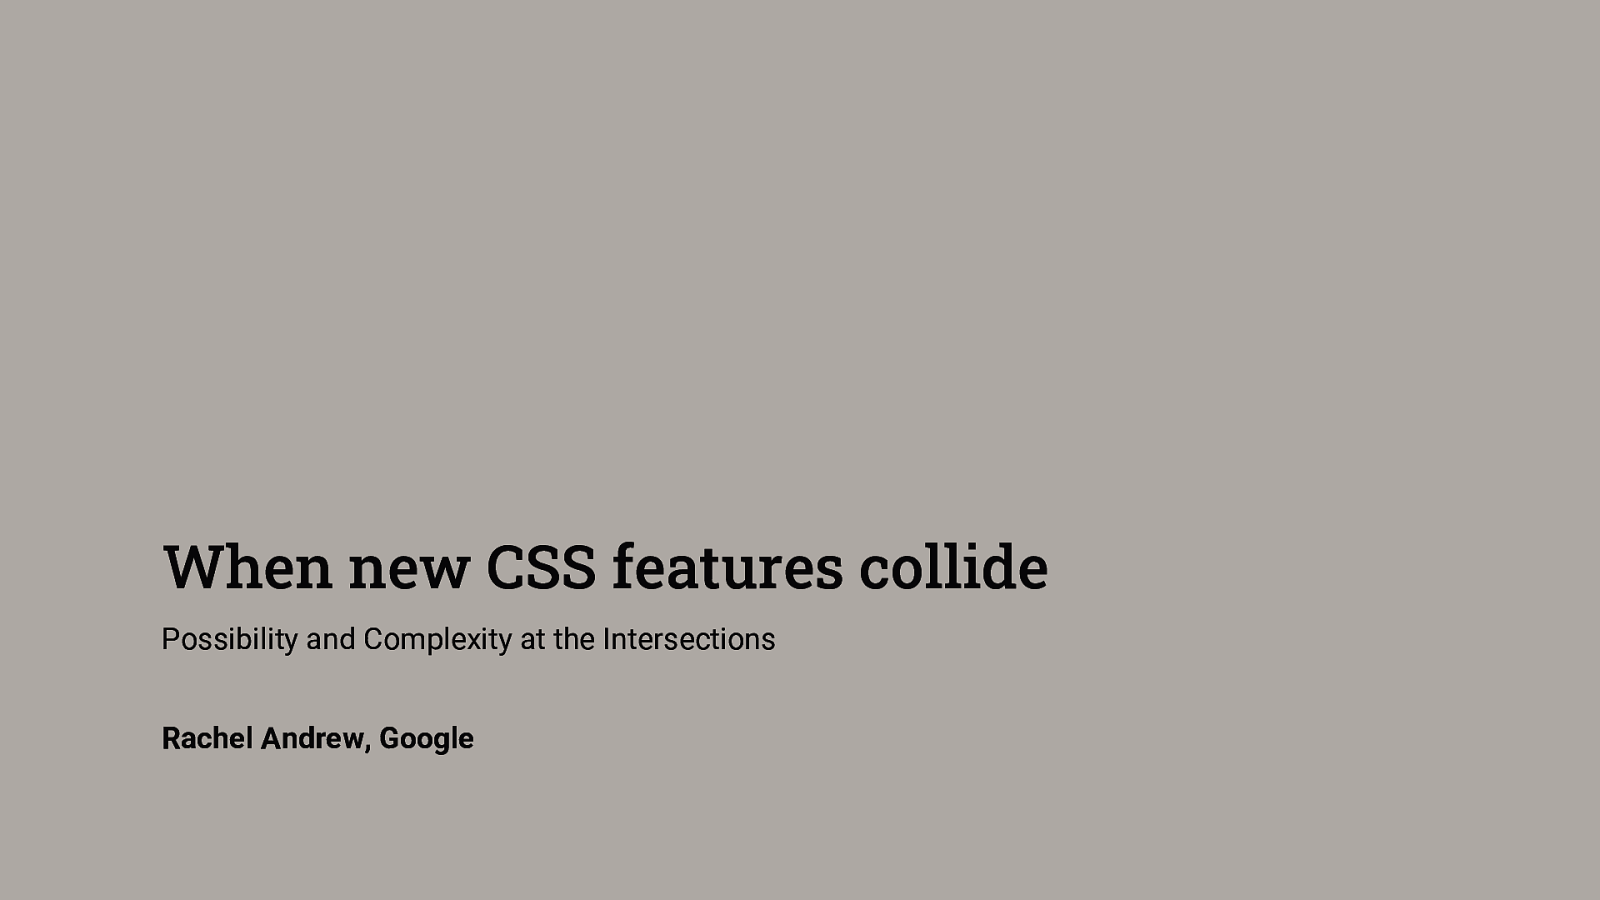 When New CSS Features Collide: Possibility and Complexity at the Intersections